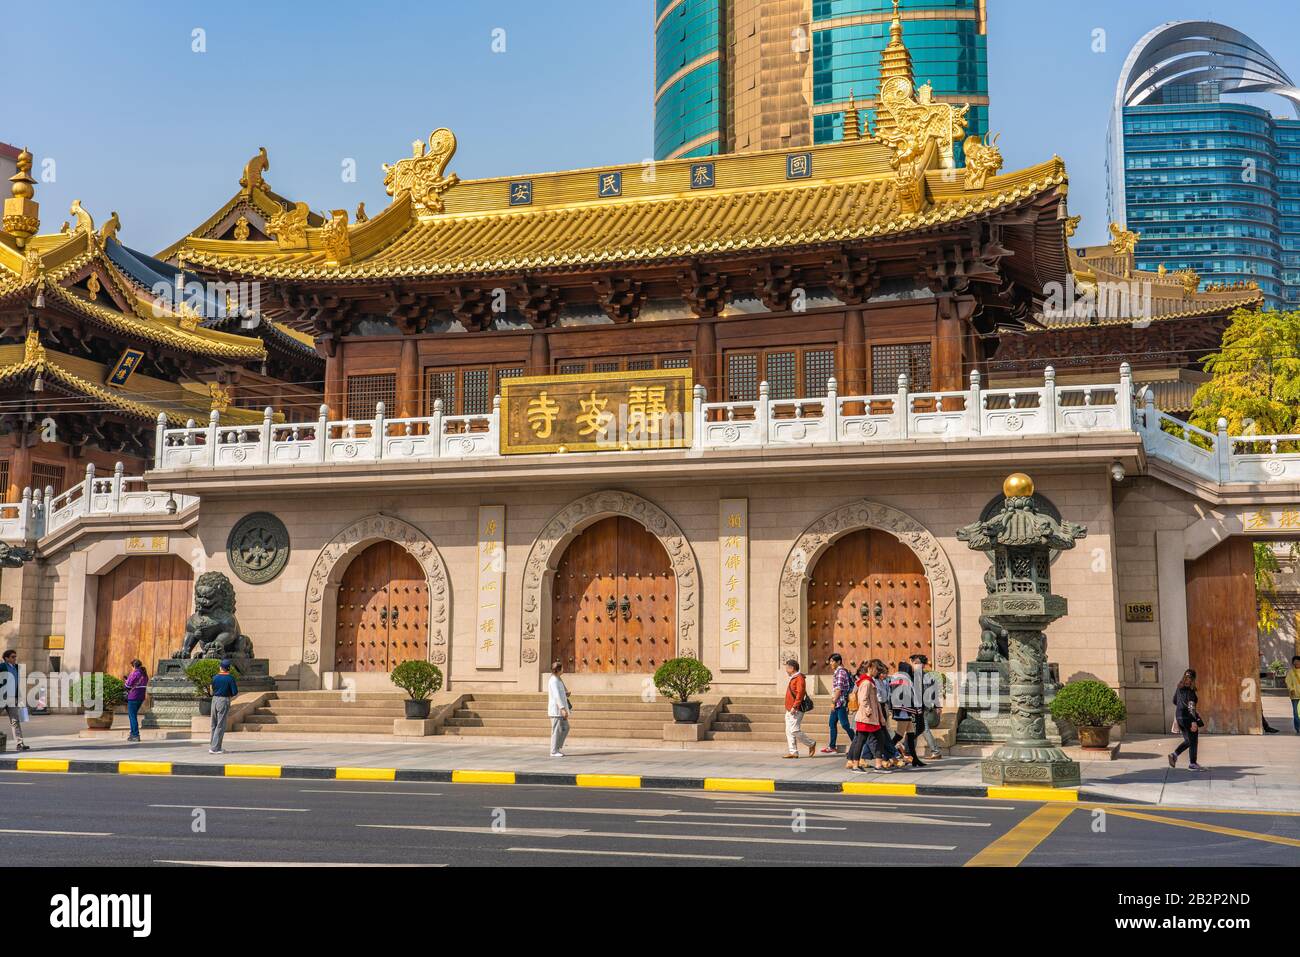 SHANGHAI, CHINA, OCTOBER 30: This is Jing'an temple, a famous buddhist temple and travel destination in the Jing'an district on October 30, 2019 in Sh Stock Photo